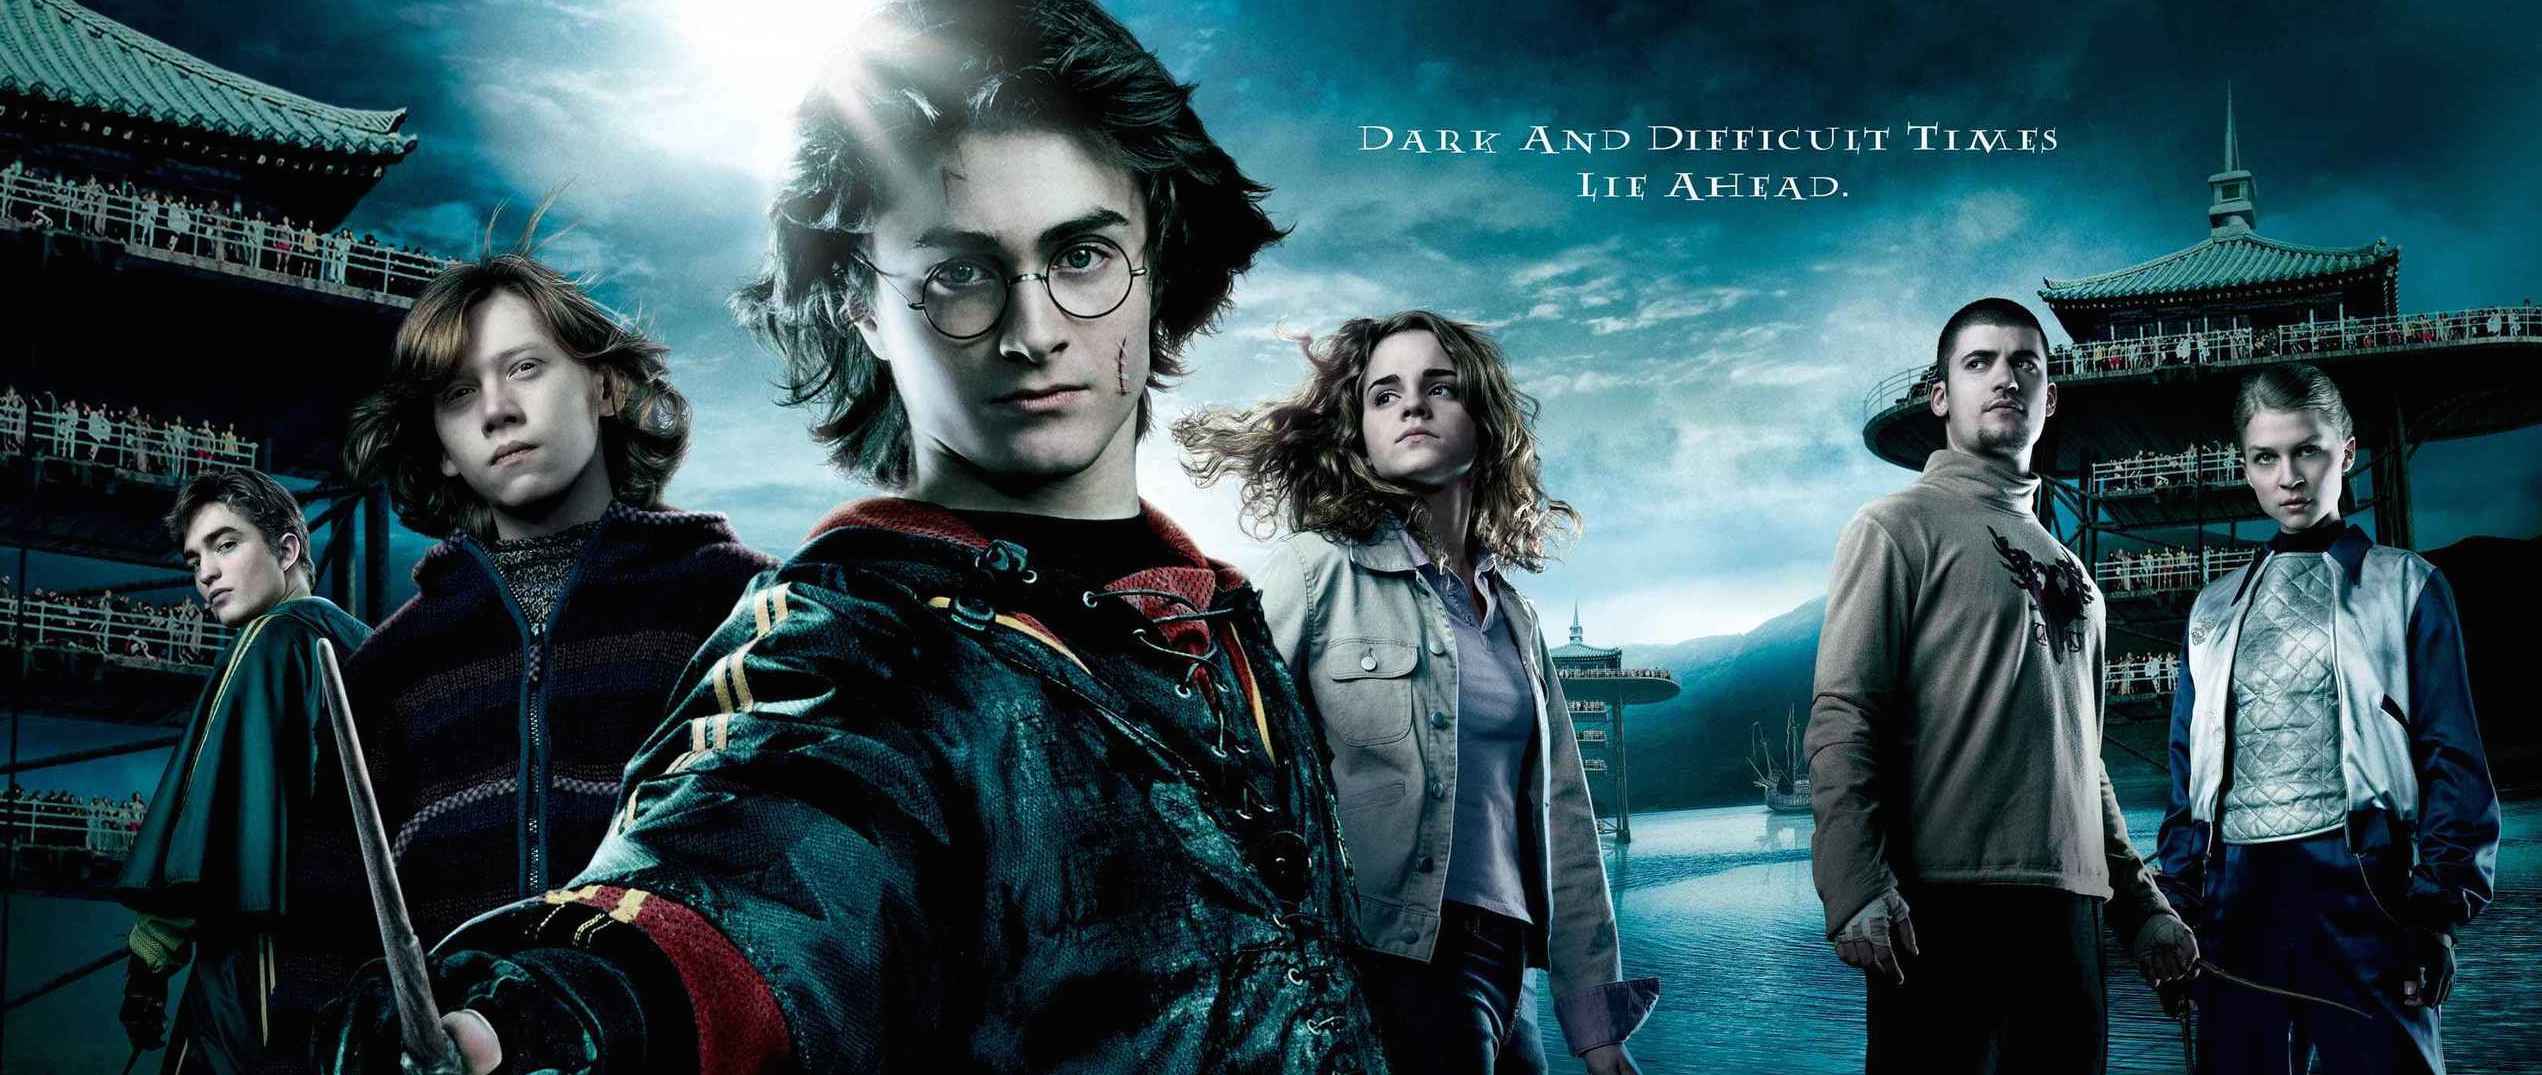 Harry Potter and the Goblet of Fire download the last version for apple